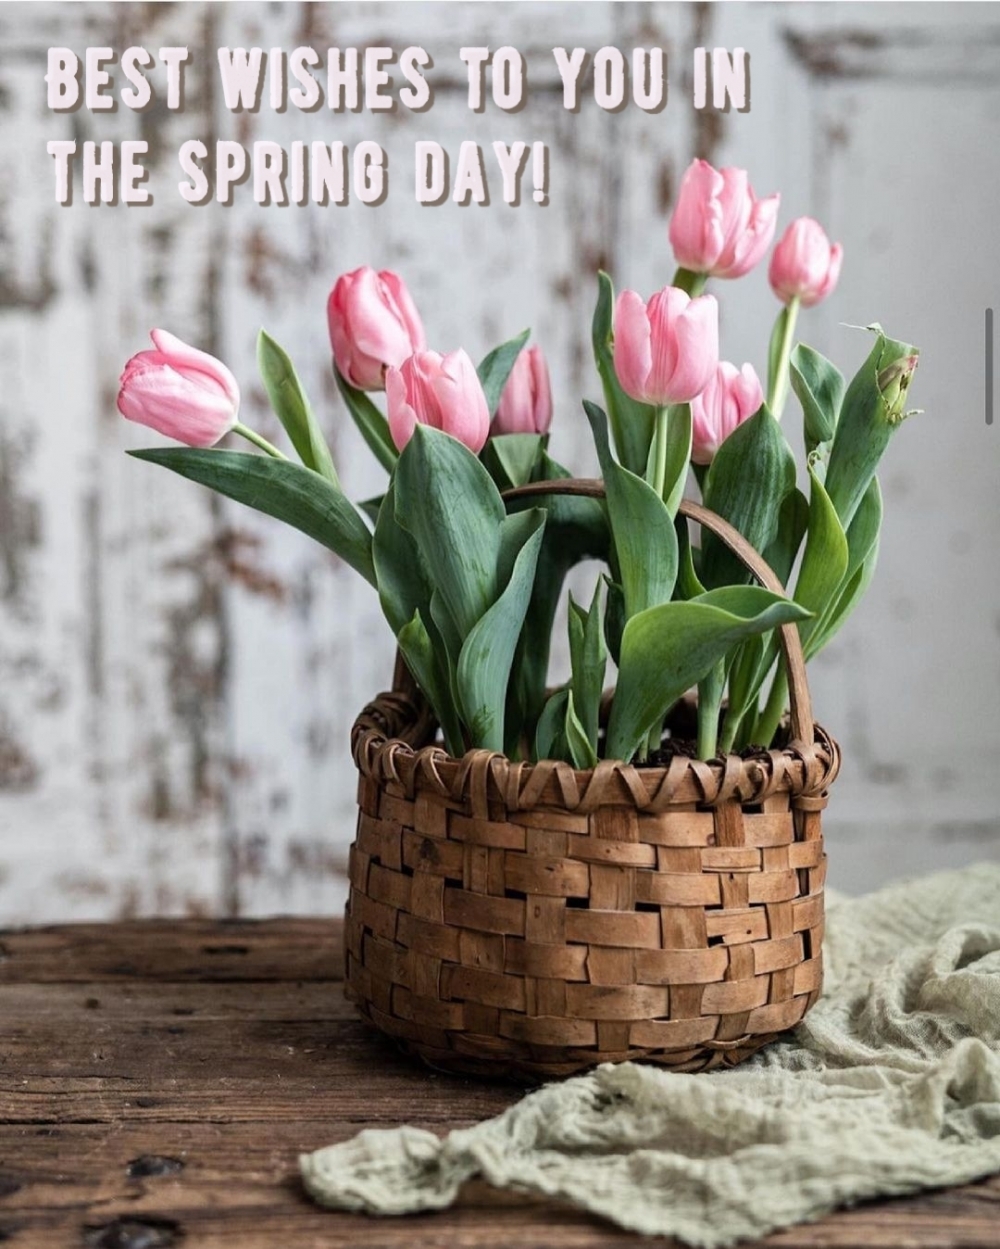 Best wishes to you in the spring day!